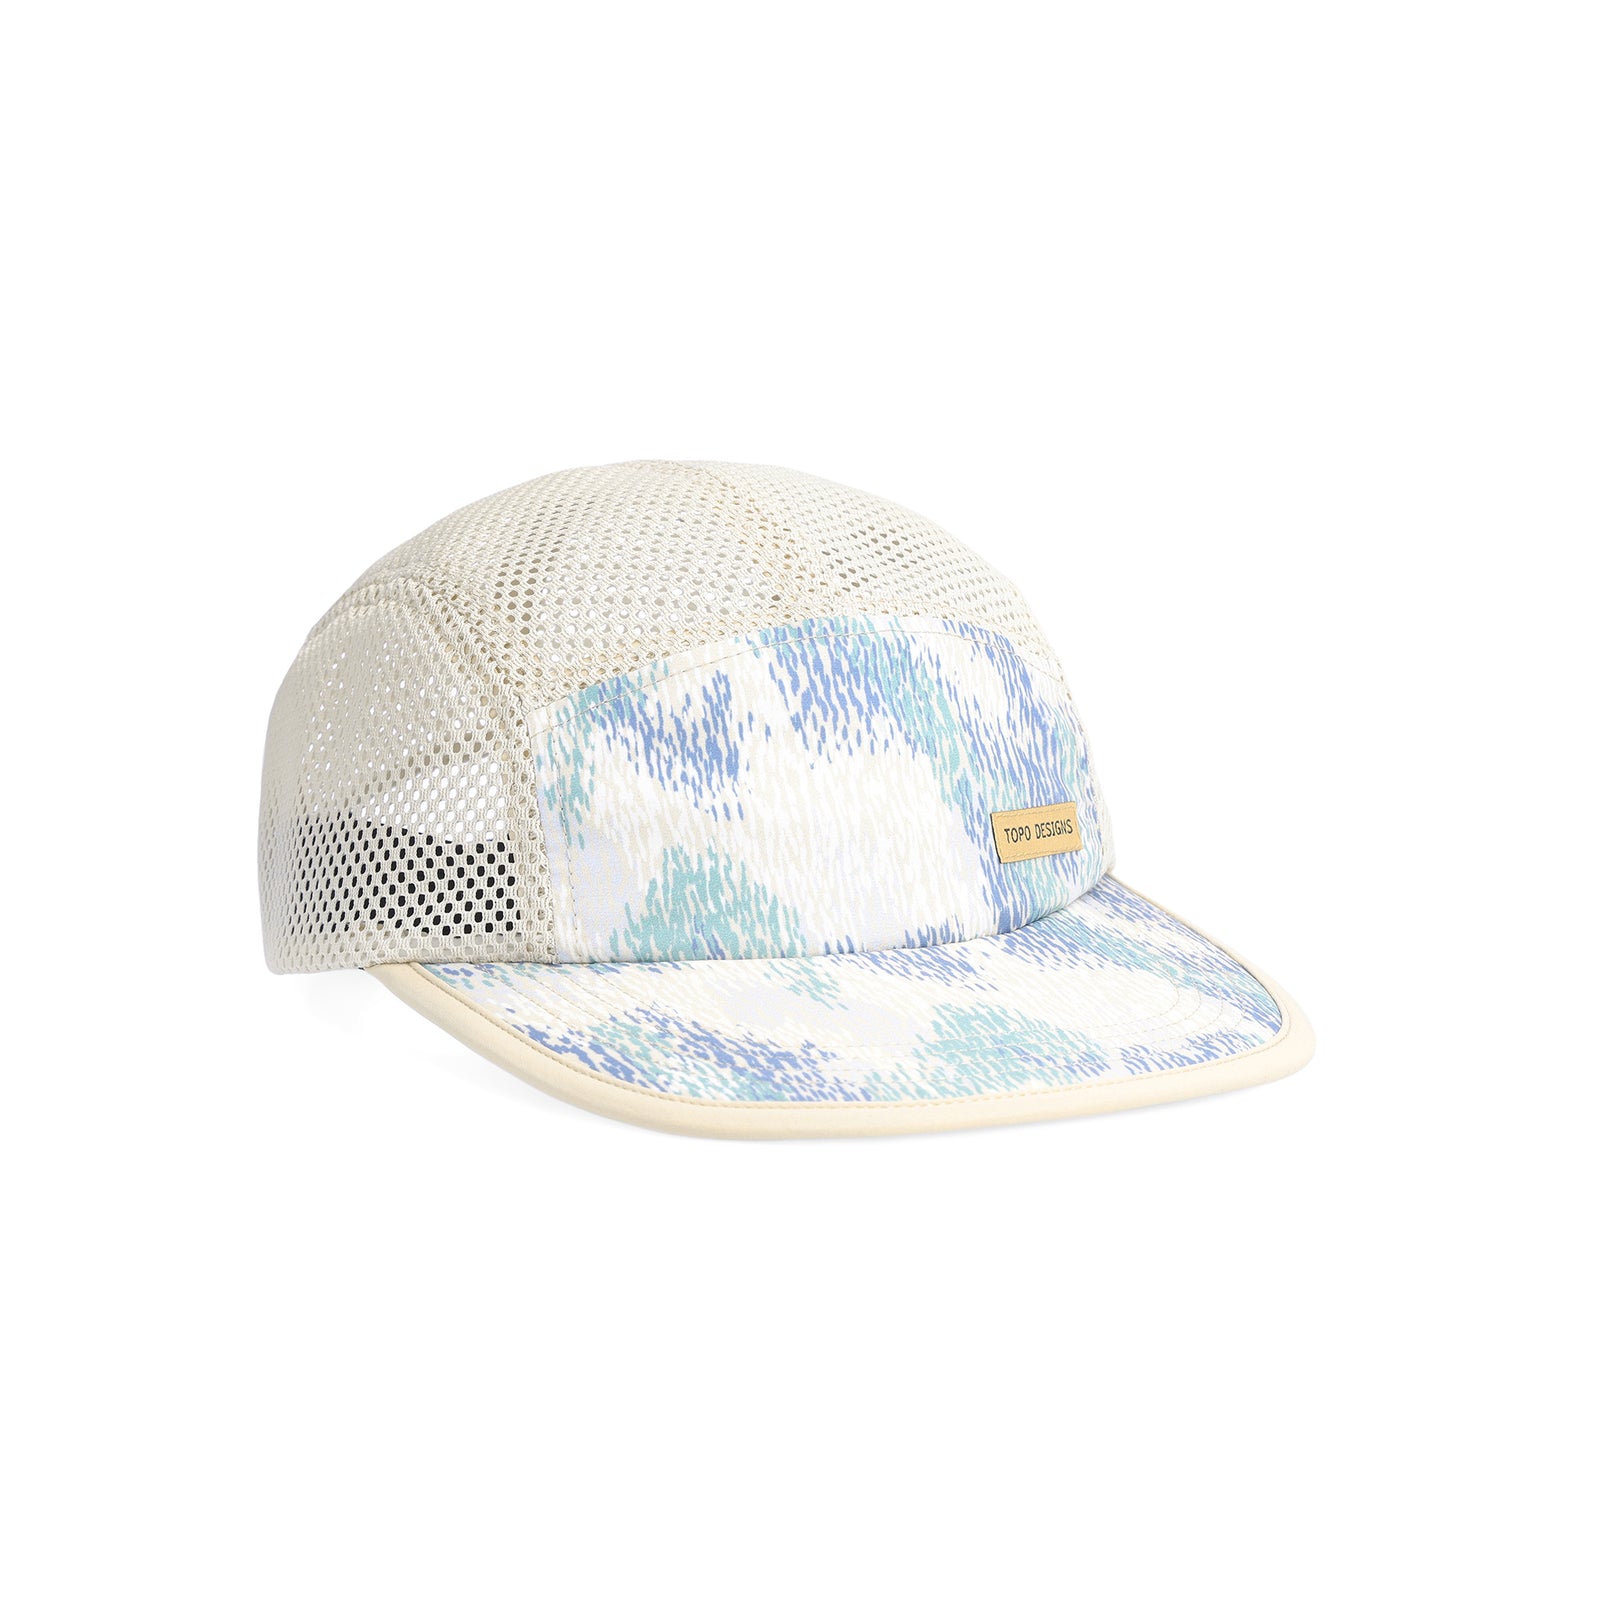 Topo Designs Global mesh back Hat in "Sand / Pebble" white. Unstructured 5-panel flexible brim packable hat.